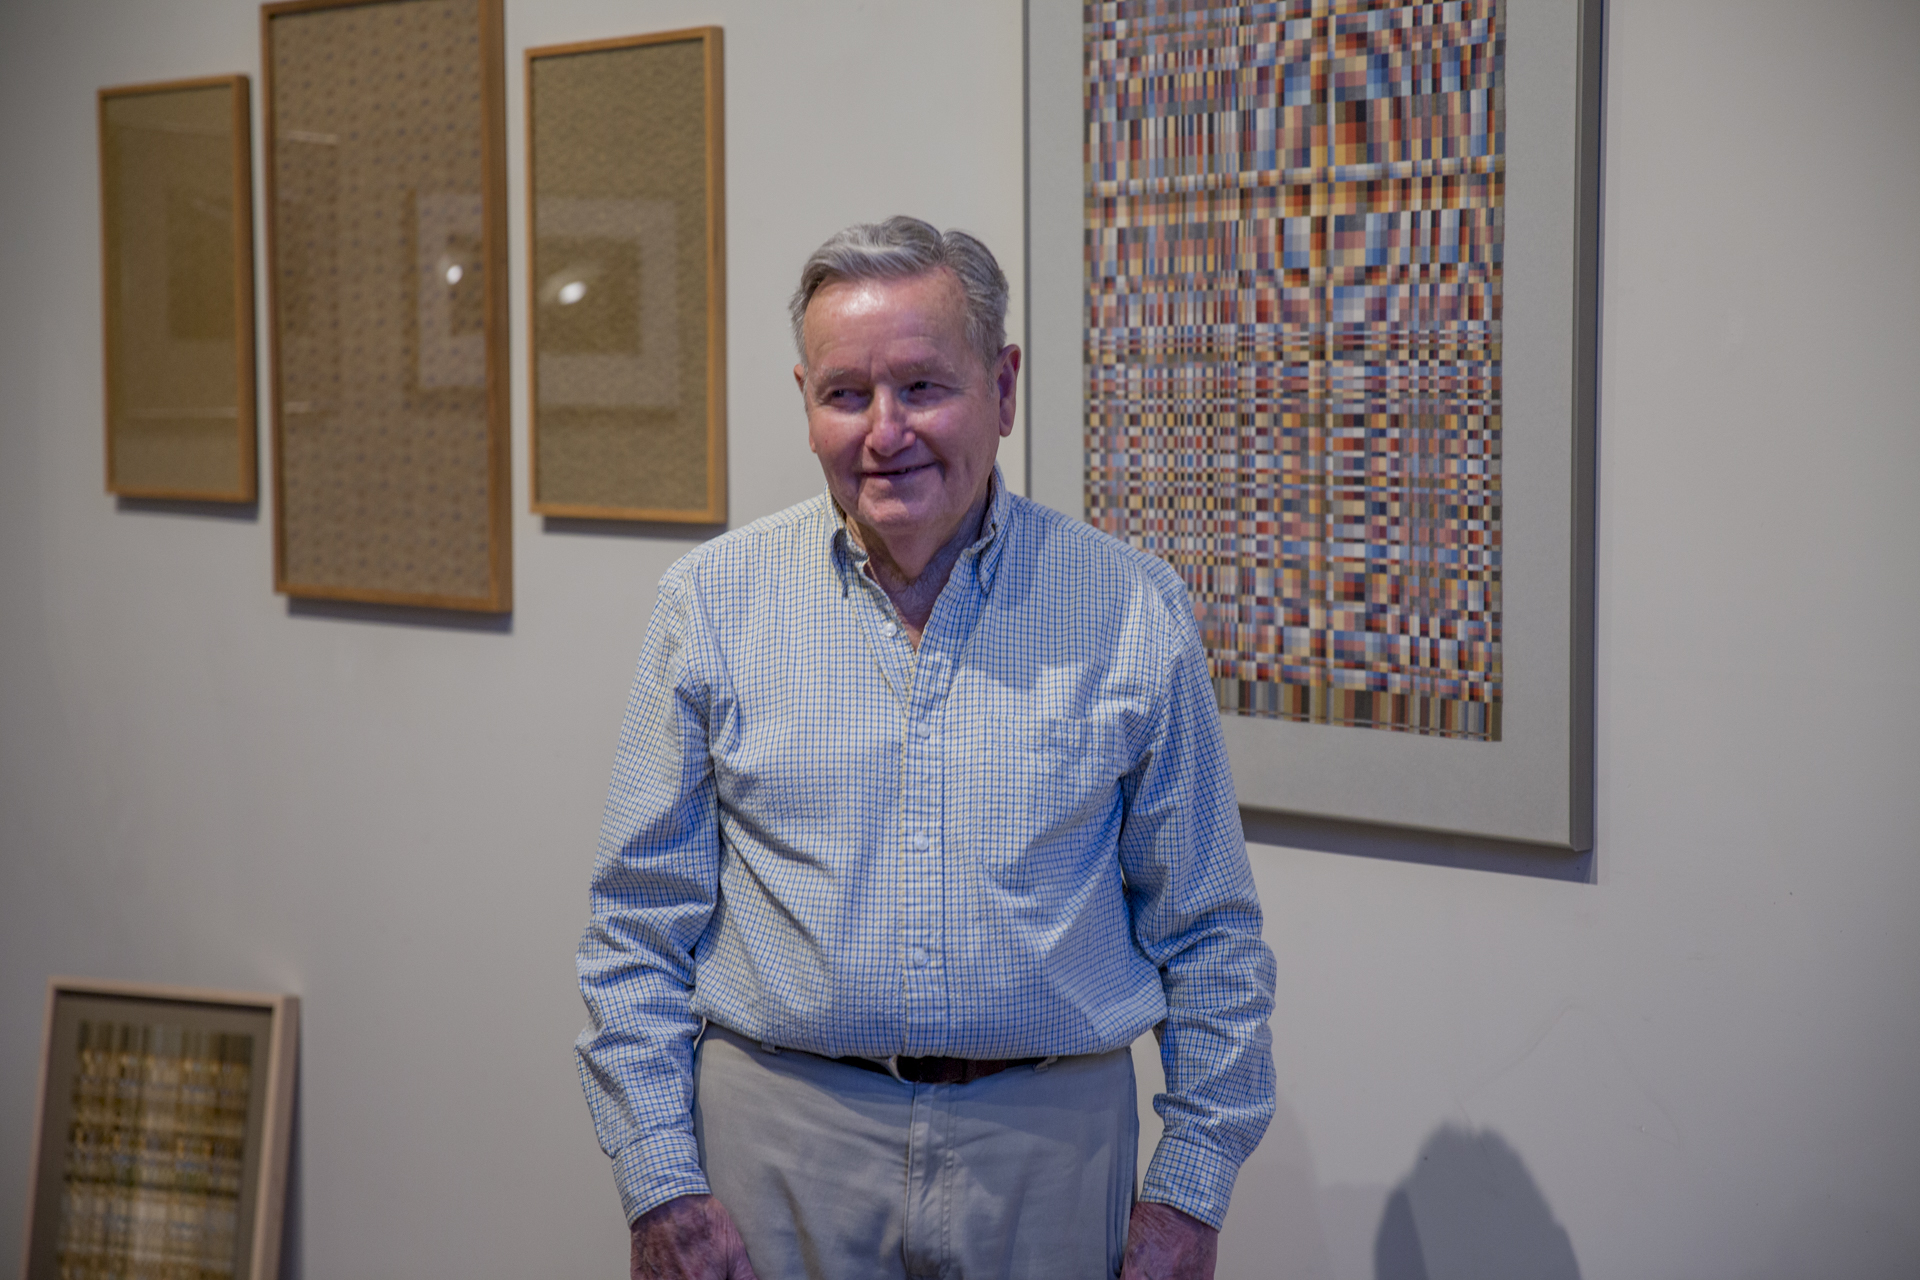 Image of Richard Landis, a silver haired man wearing a white and blue checkered shirt, in his studio.